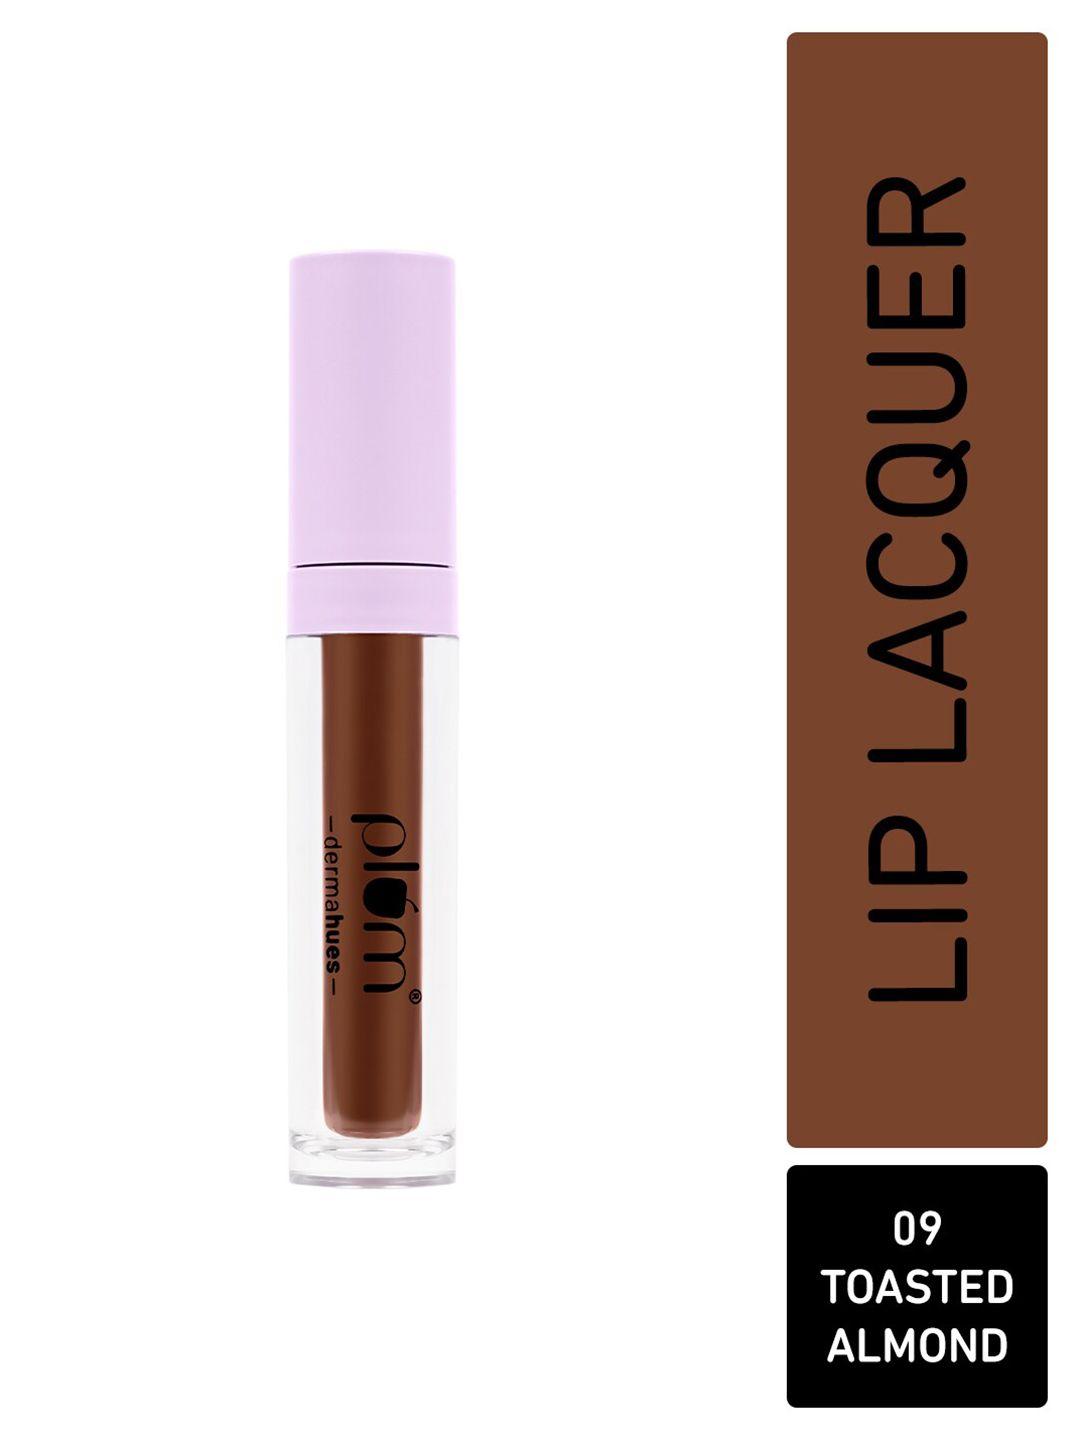 plum glassy glaze 3-in-1 velvety smooth lip lacquer with jojoba 4.5ml - toasted almond 09